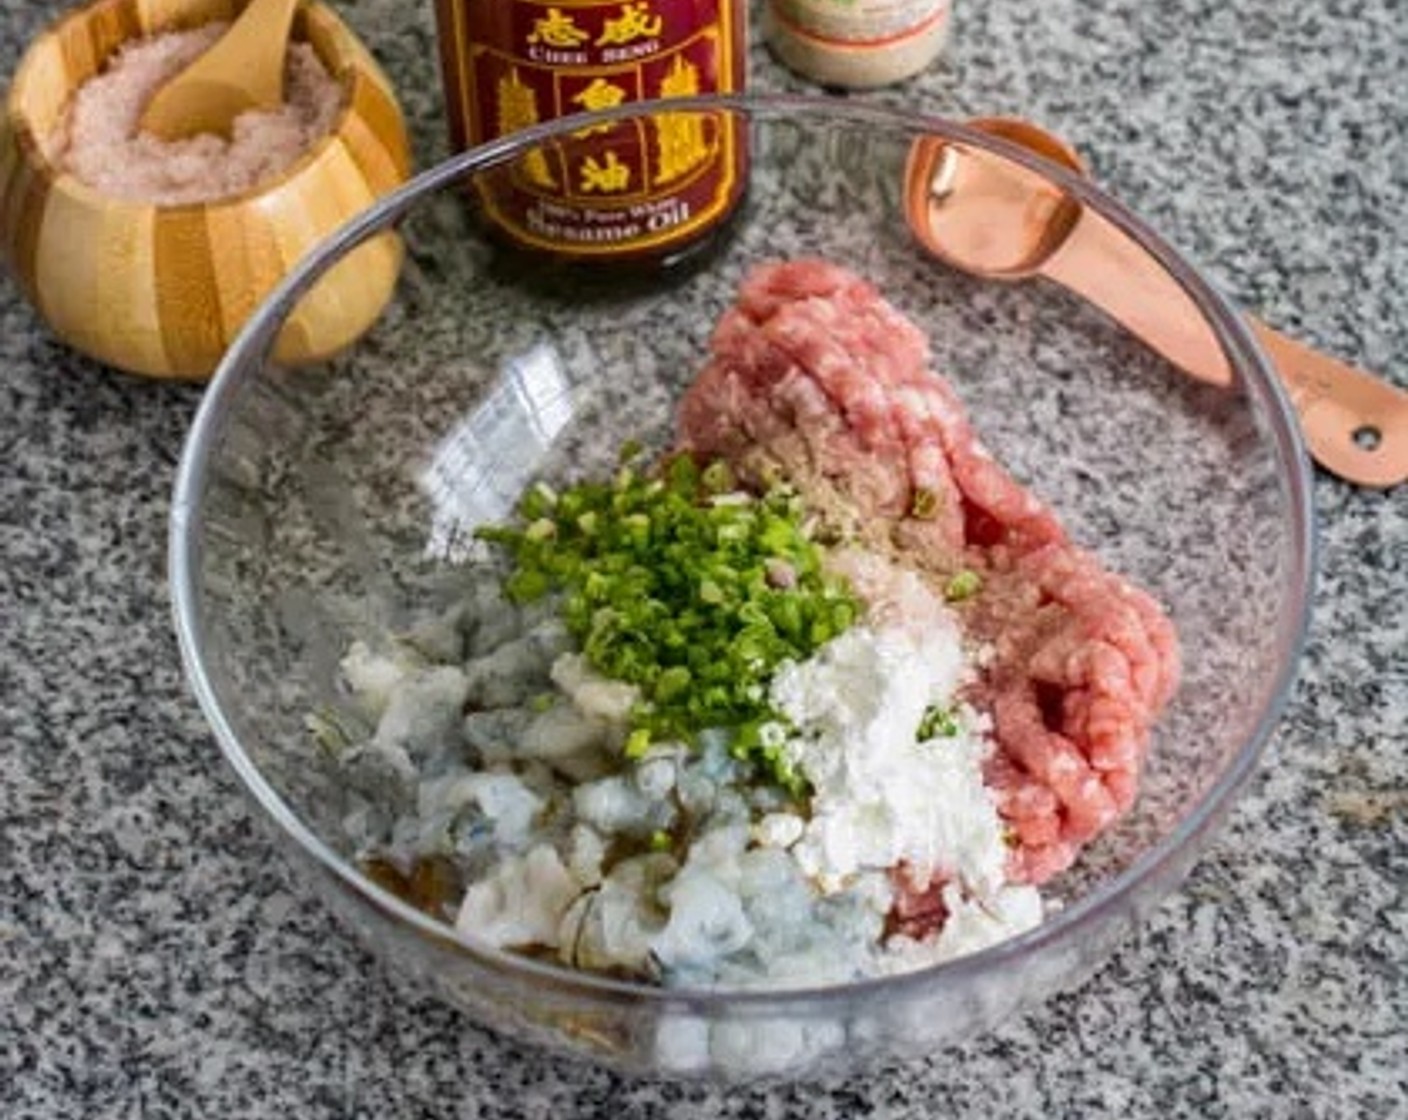 step 1 Prepare the wonton filling by combining in a bowl Ground Pork (8 oz), Shrimp (8 oz), Sesame Oil (1 Tbsp), Corn Starch (1 Tbsp), Salt (to taste), Ground White Pepper (2 dashes), and Scallion (1/4 cup). Mix well and allow to marinate for 15 minutes.